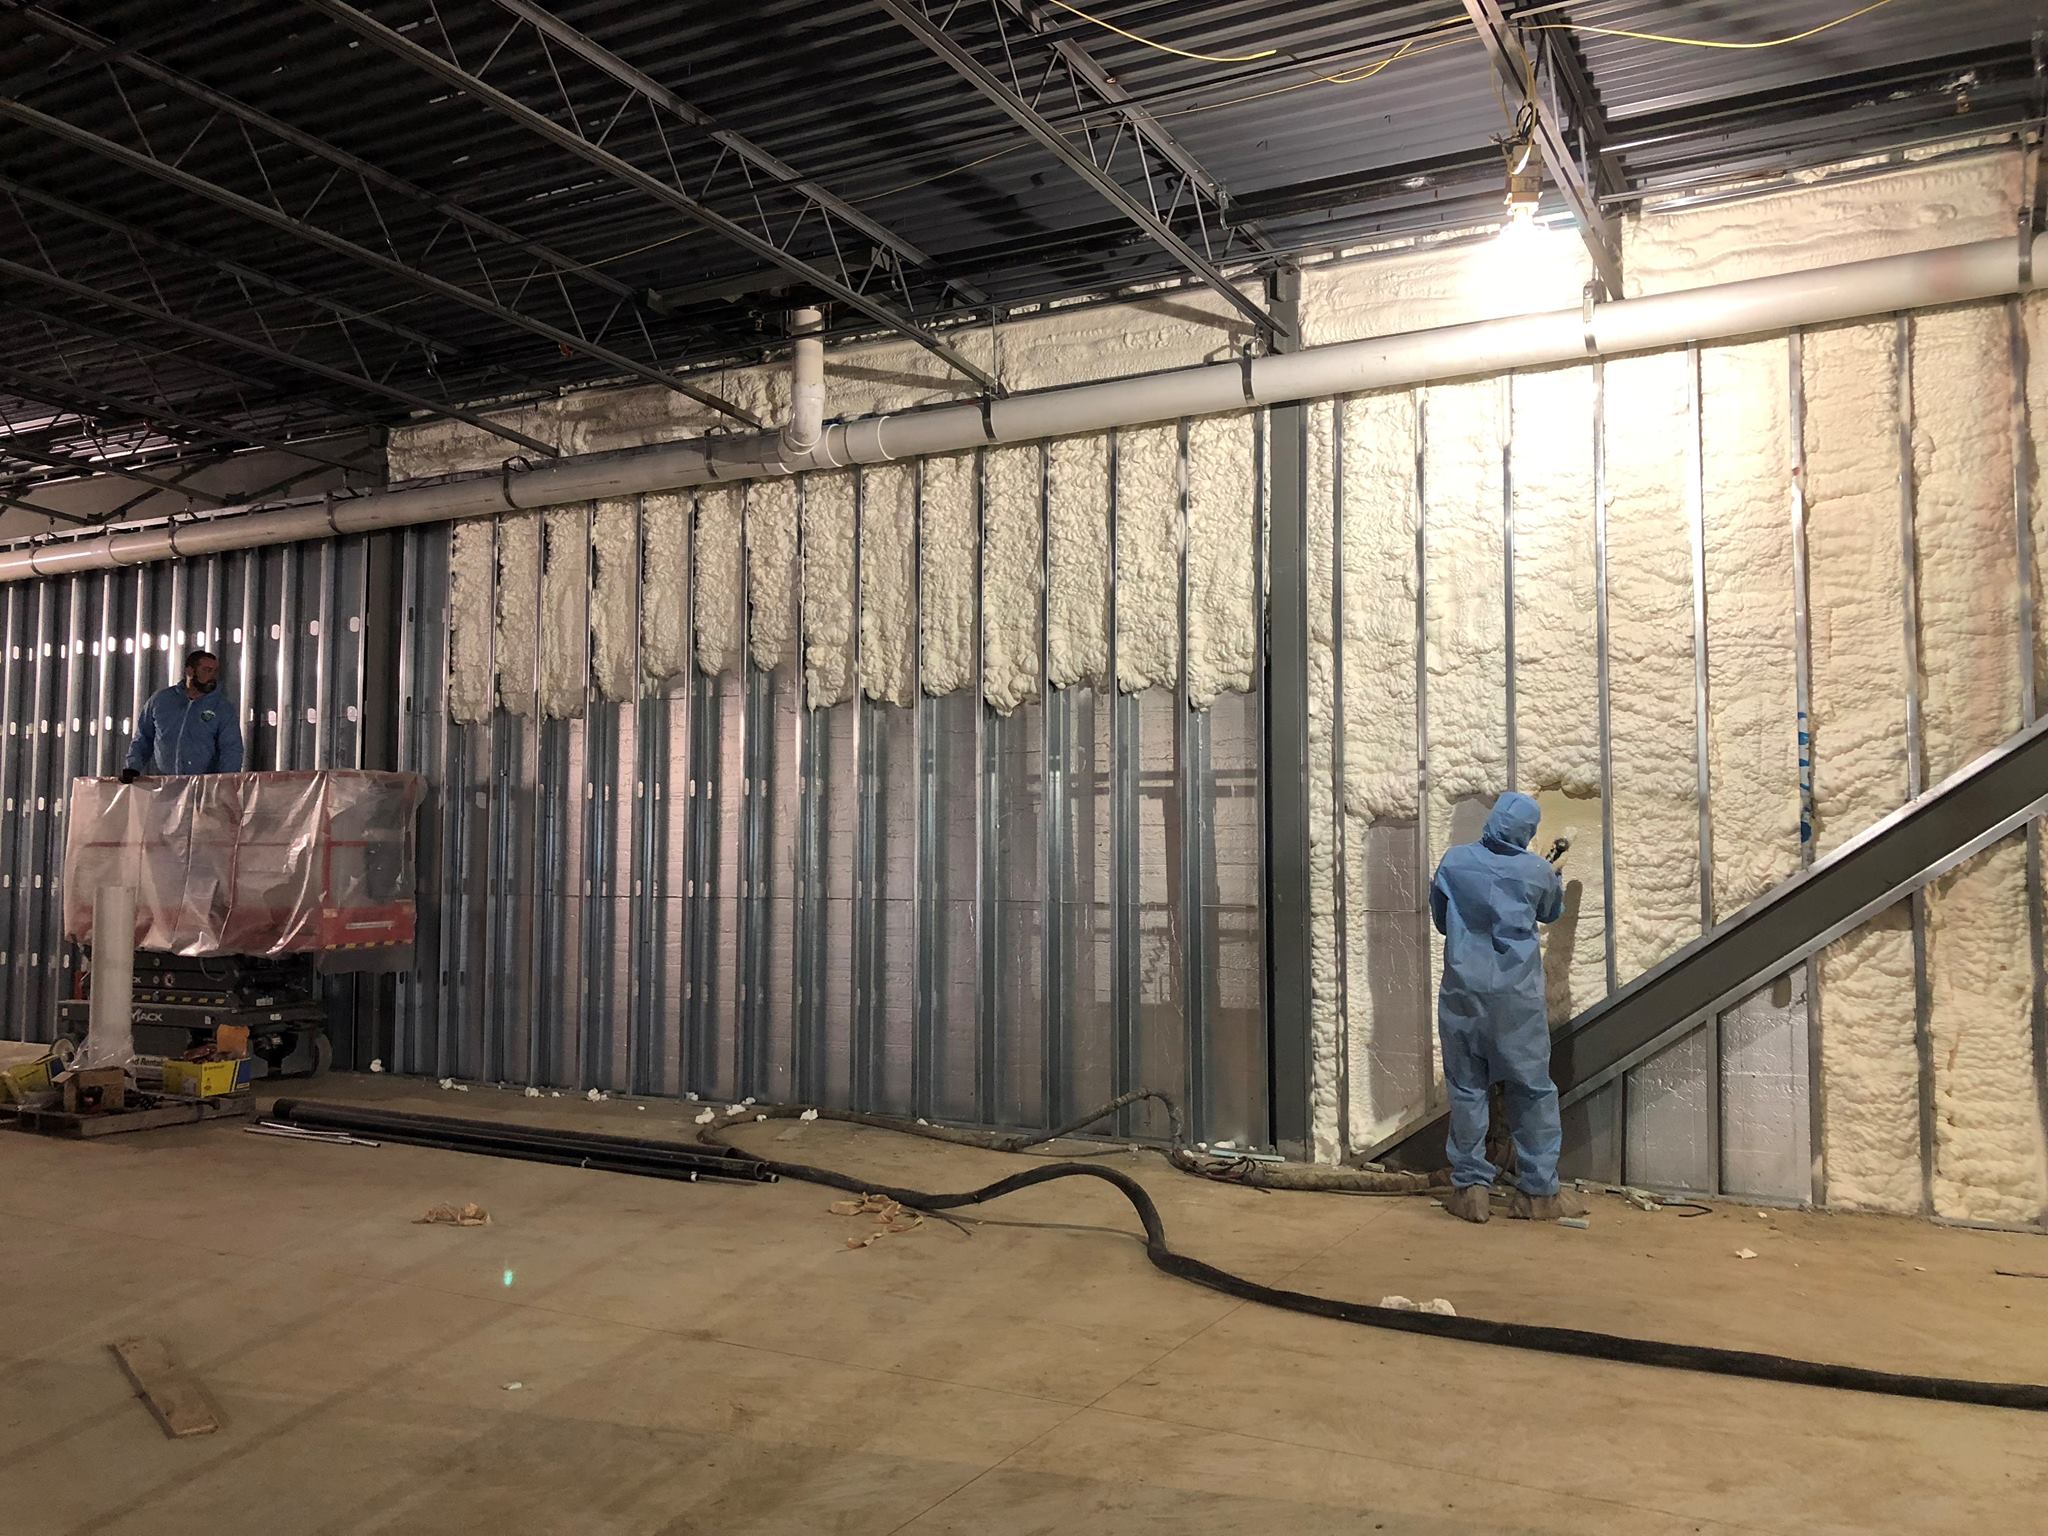 Commercial Insulation